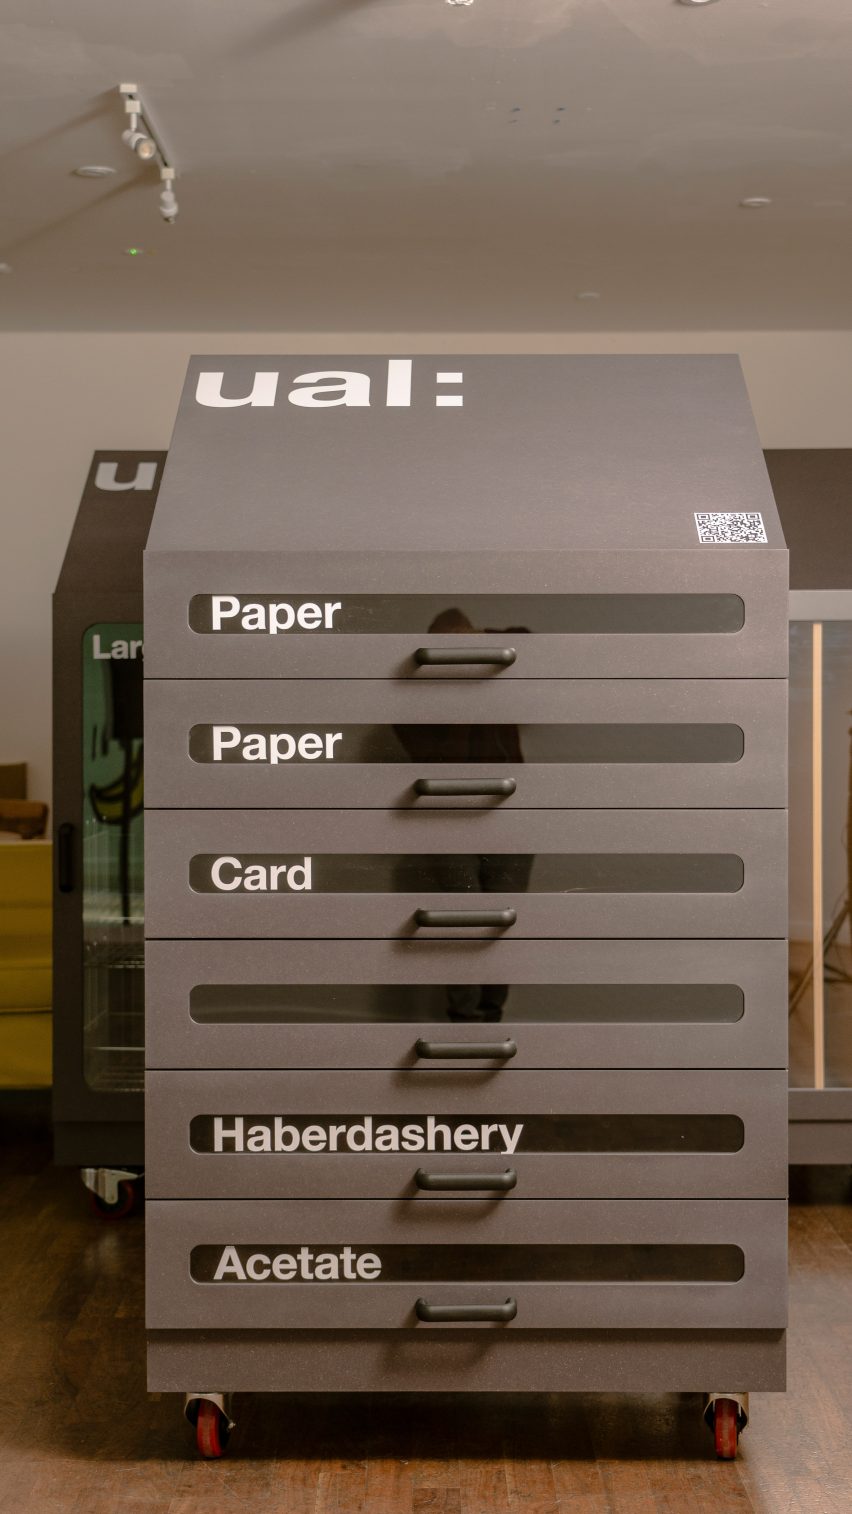 Material donation box for paper, board, haberdashery and acetate at the University of the Arts London (UAL)